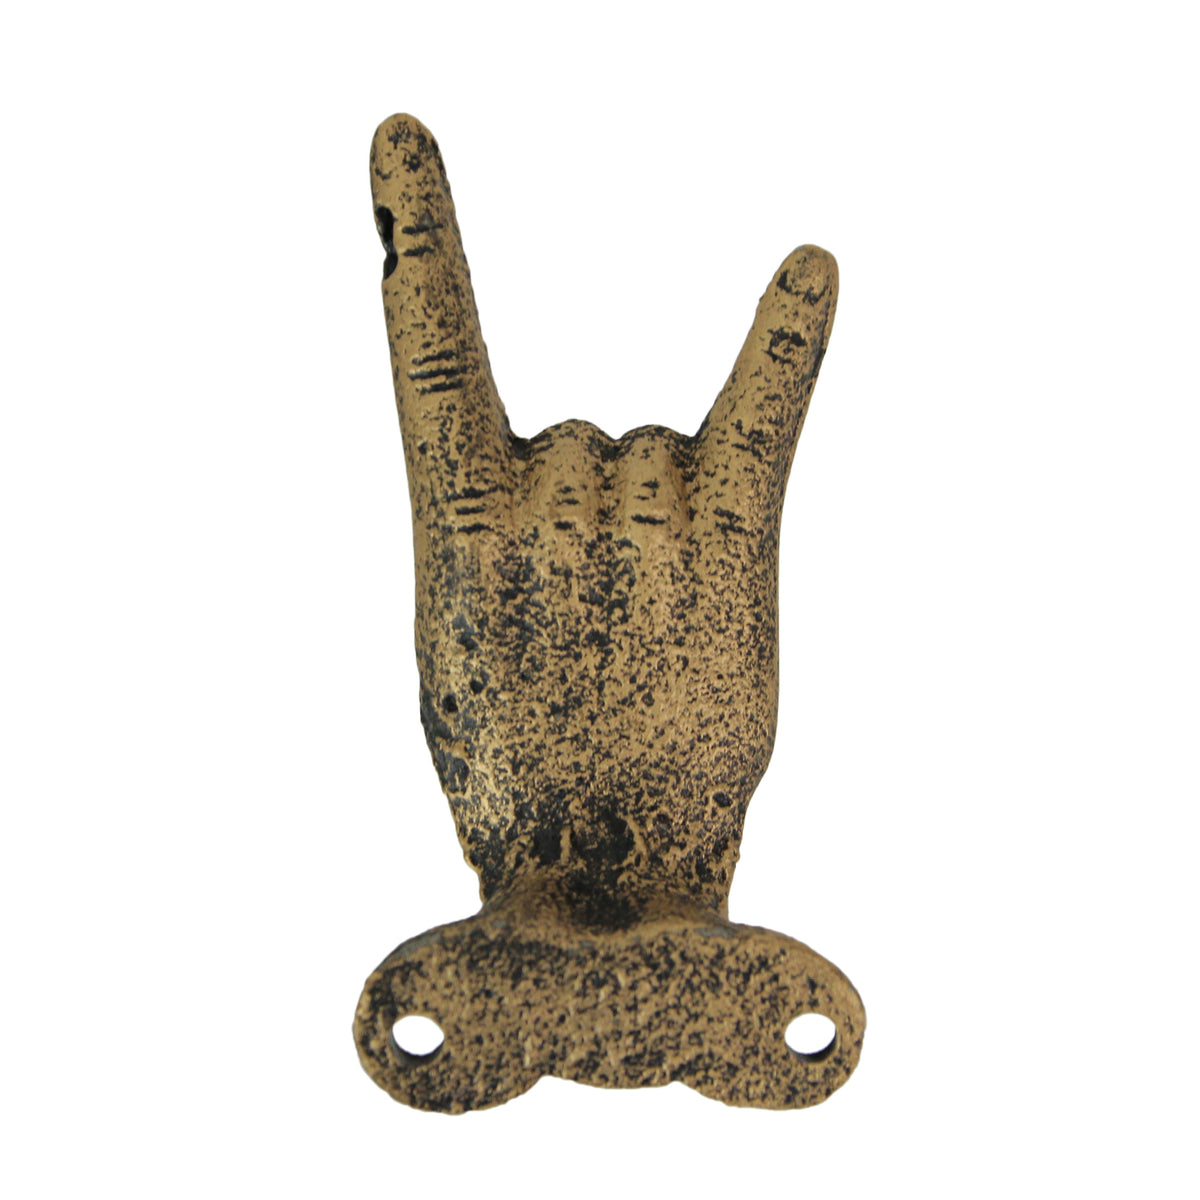 Hand Gesture Wall Hooks - Iron Accents